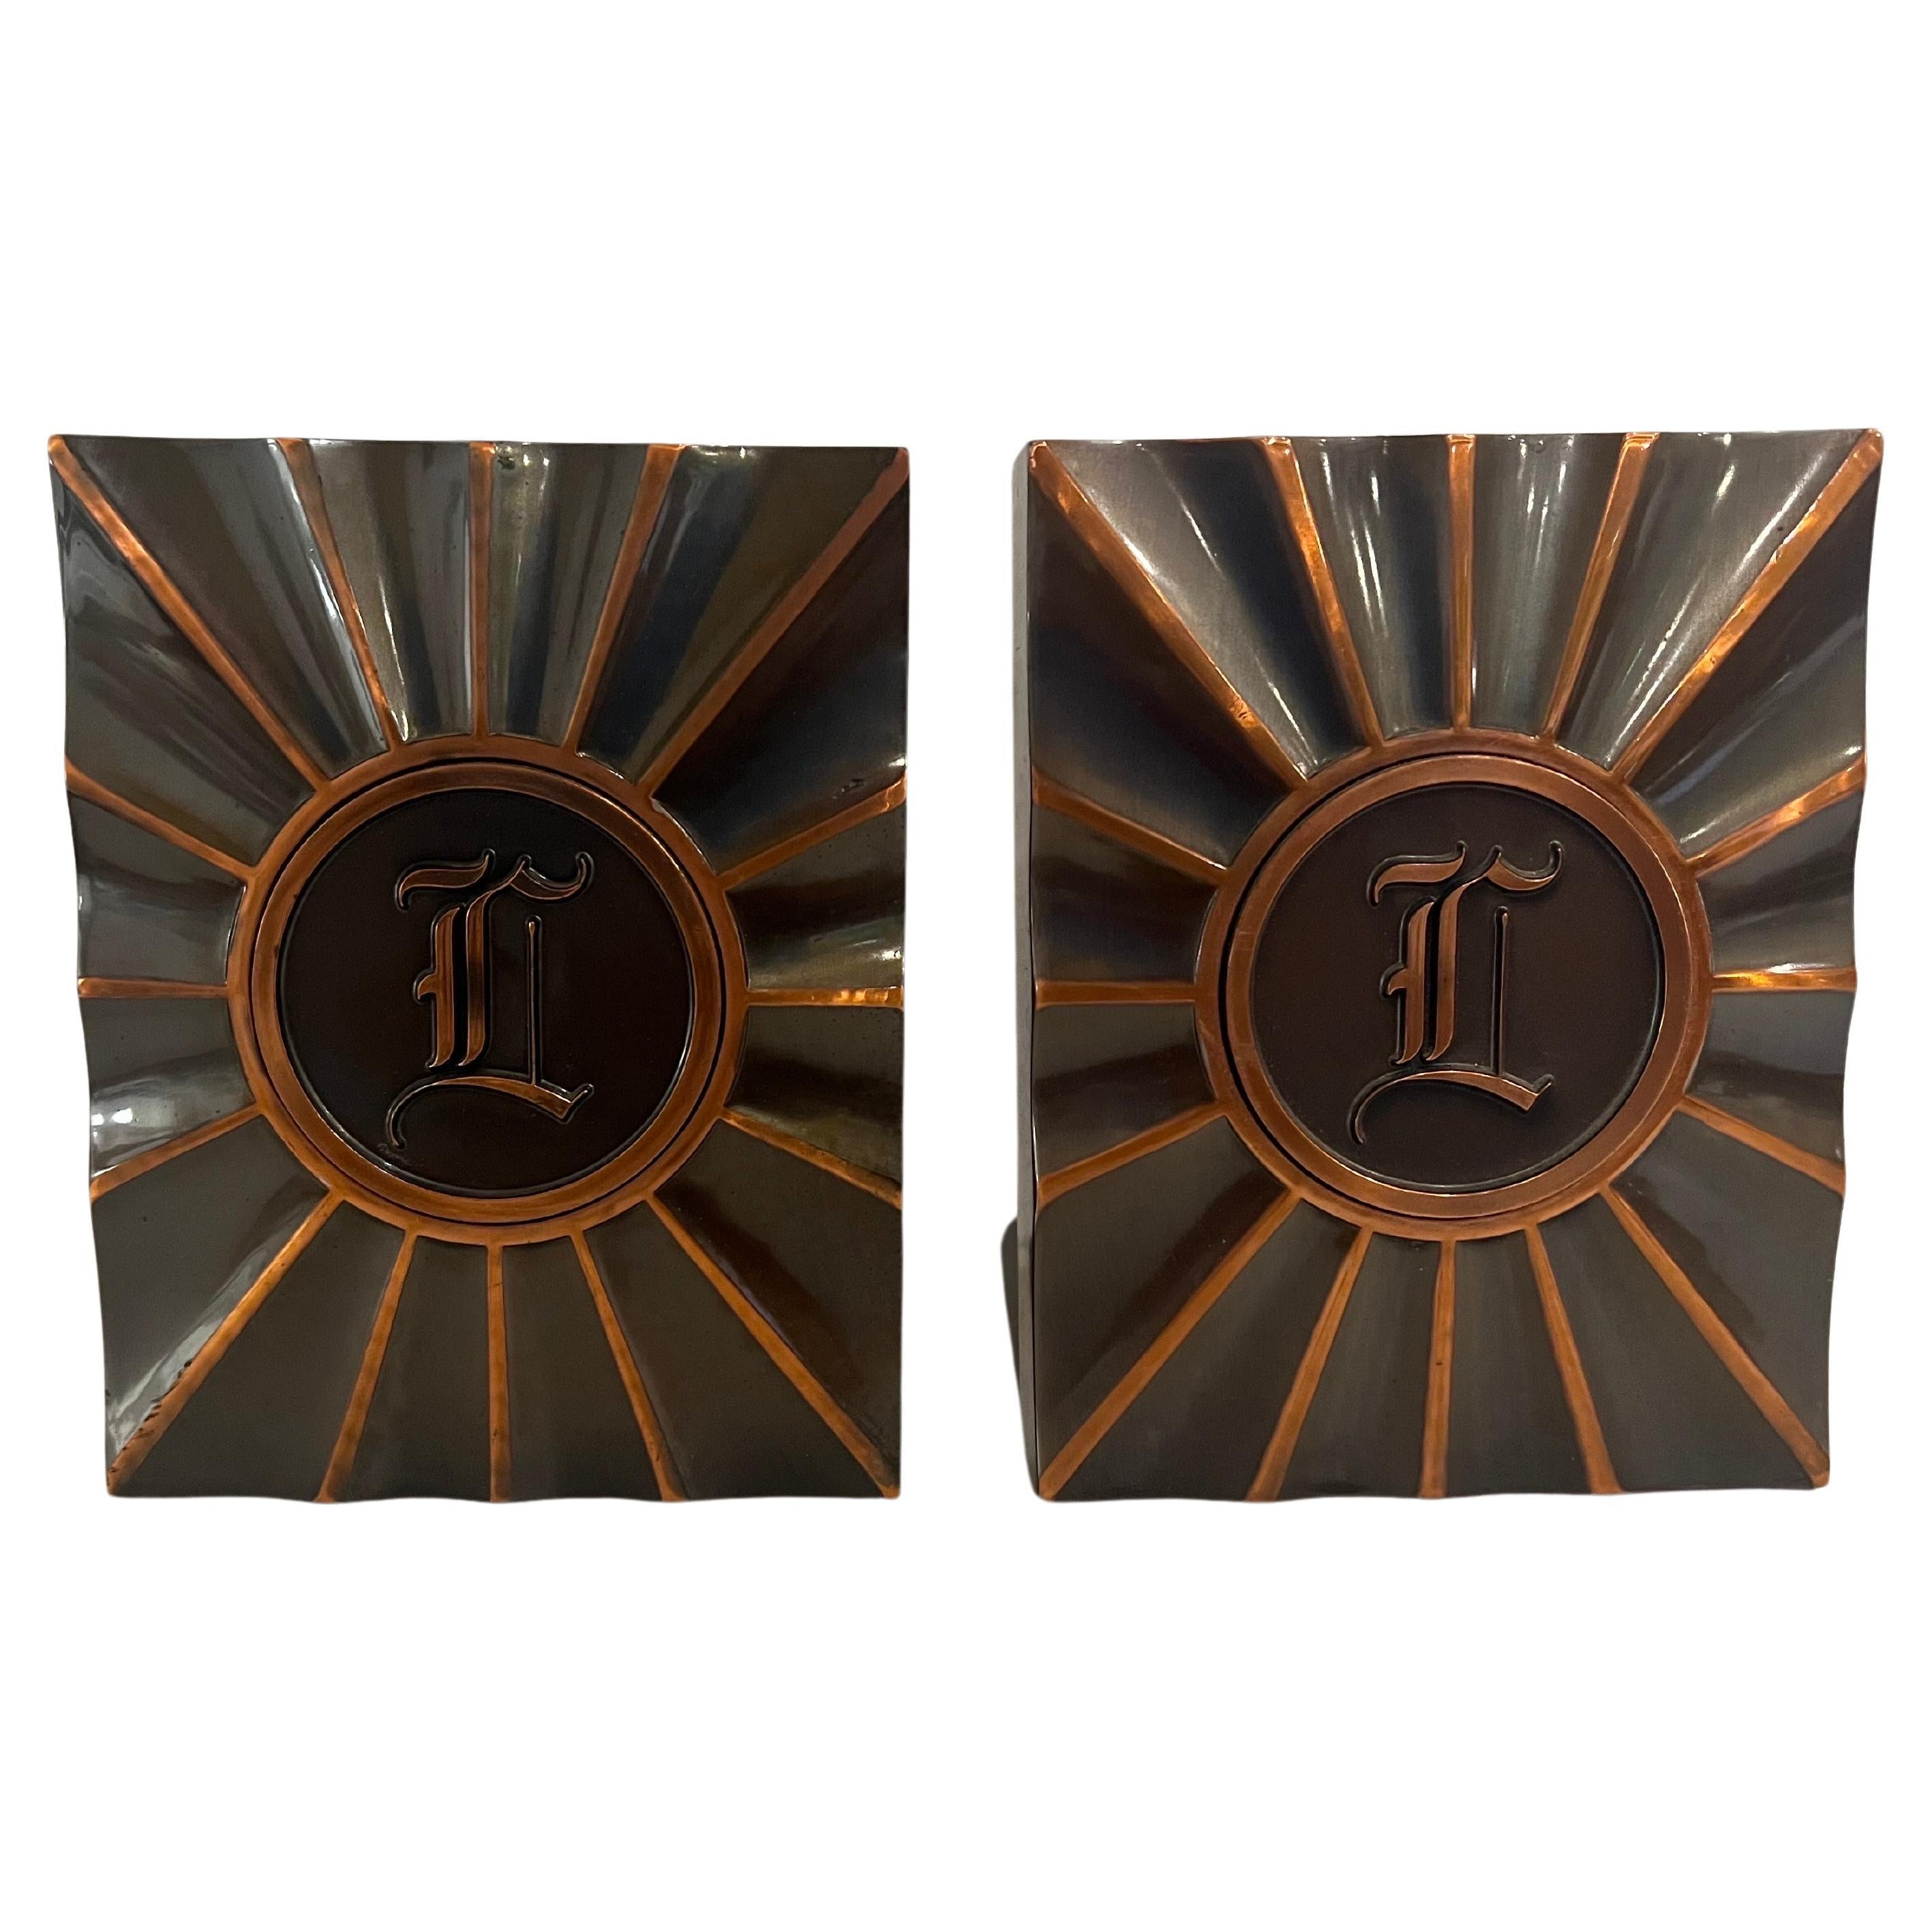 Nice pair of art Deco bookends monogrammed with the letter L, circa 1940's excellent condition very light wear, produced by L.E Mason Company.